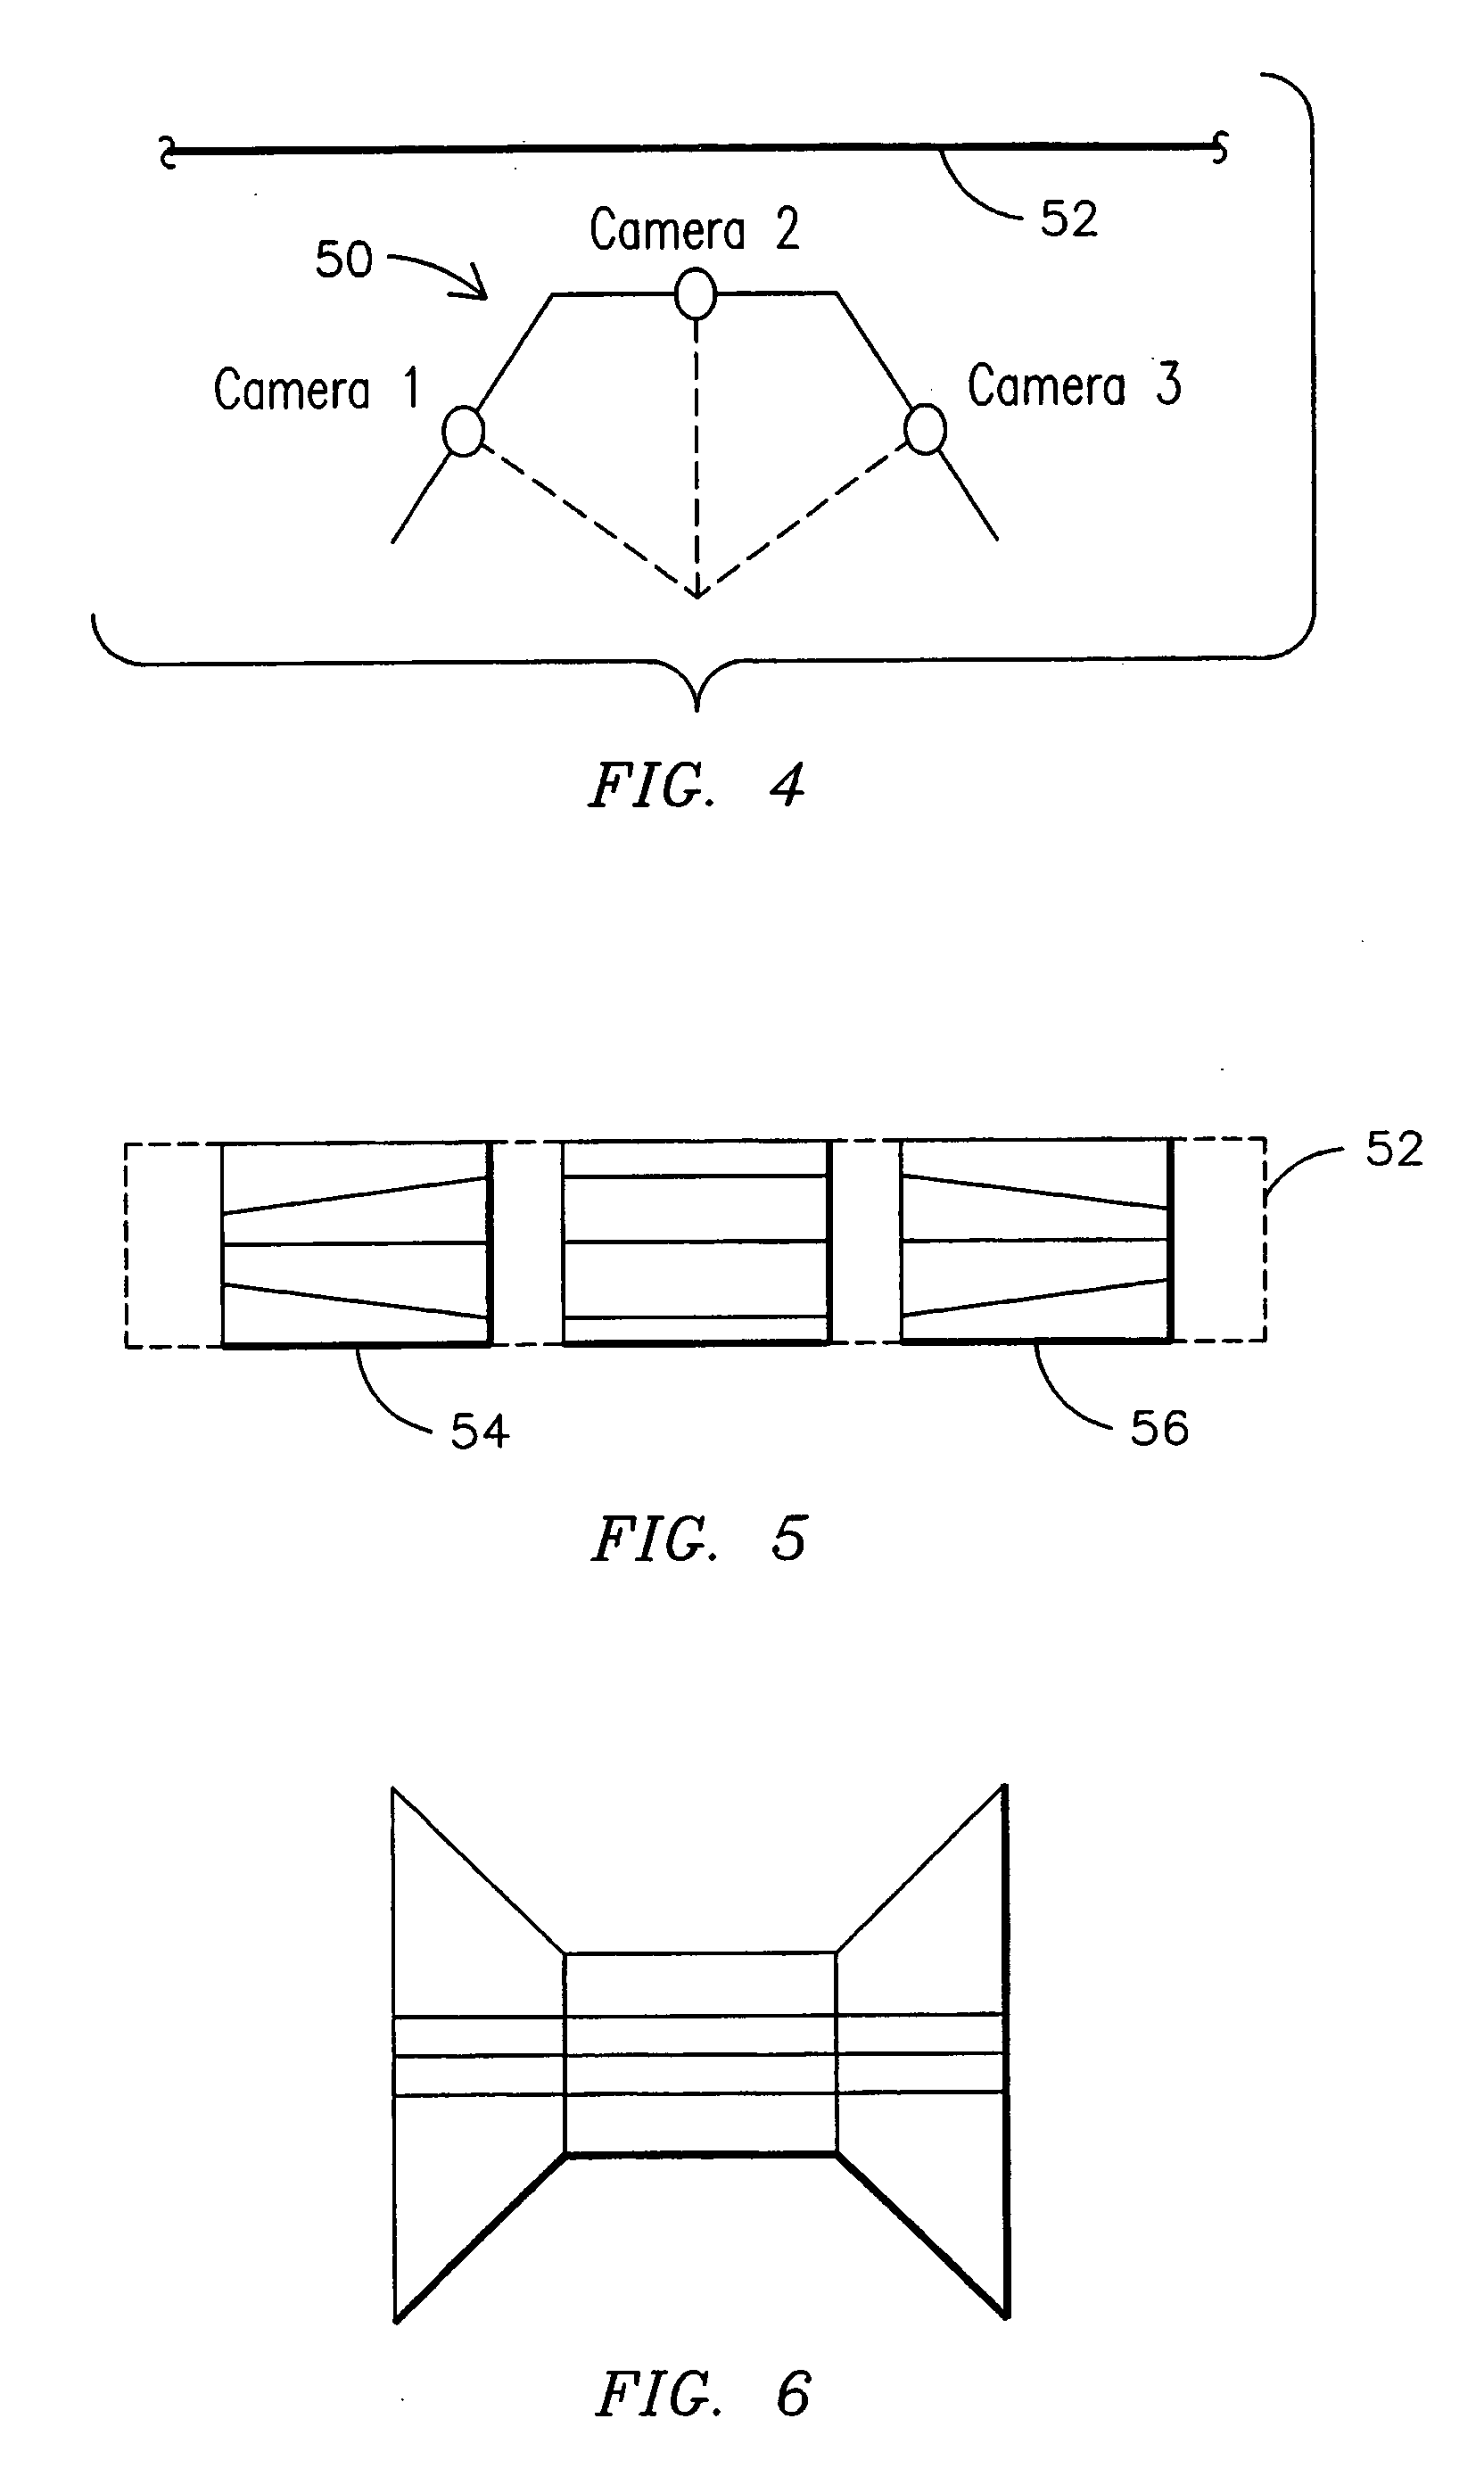 Digital imaging system for creating a wide-angle image from multiple narrow angle images